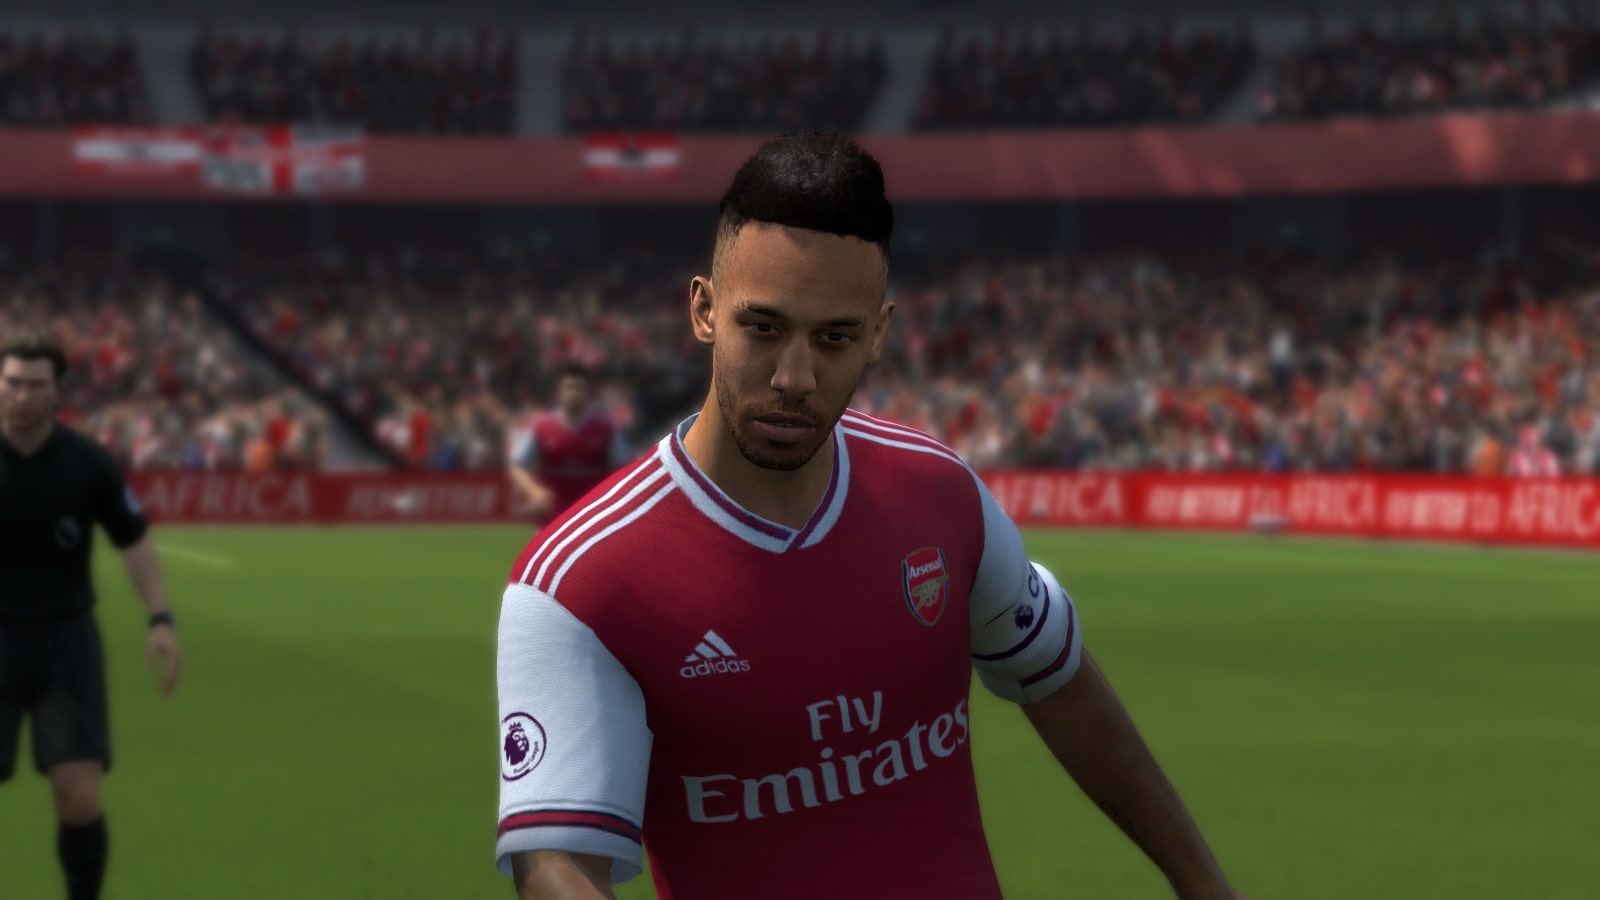 Fifa 14 patch